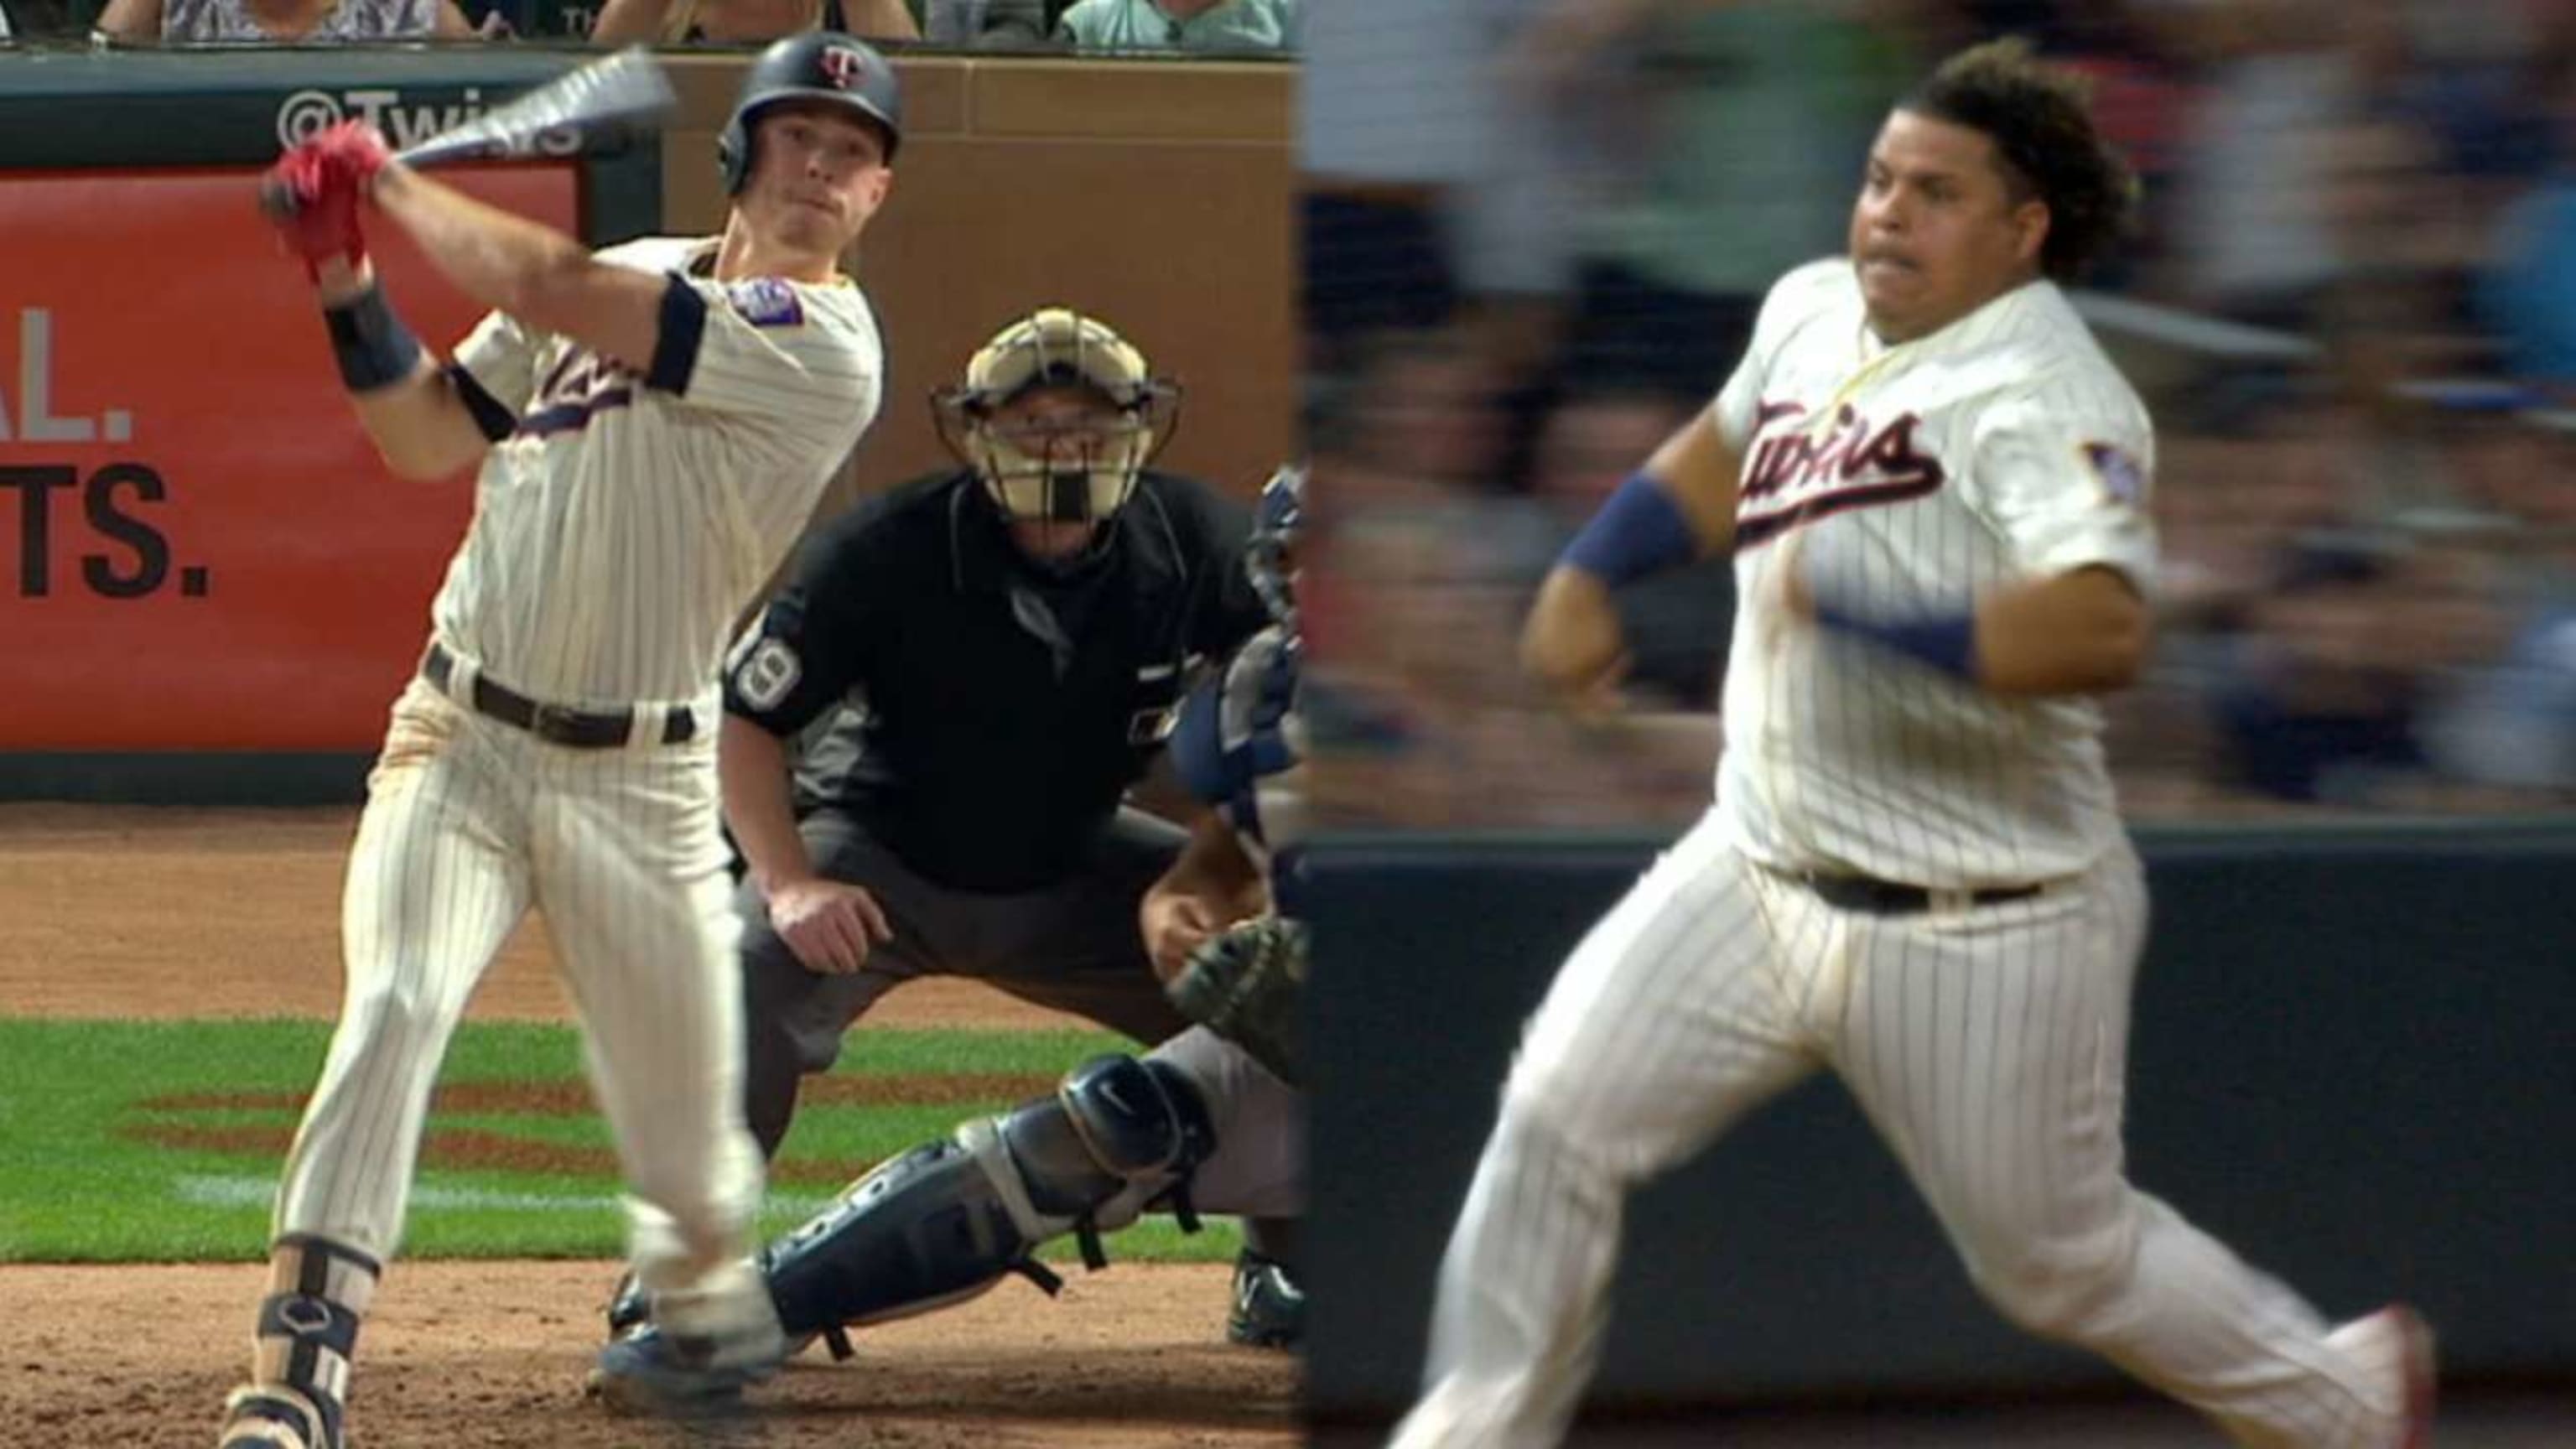 Willians Astudillo's heroic run from first to home left him